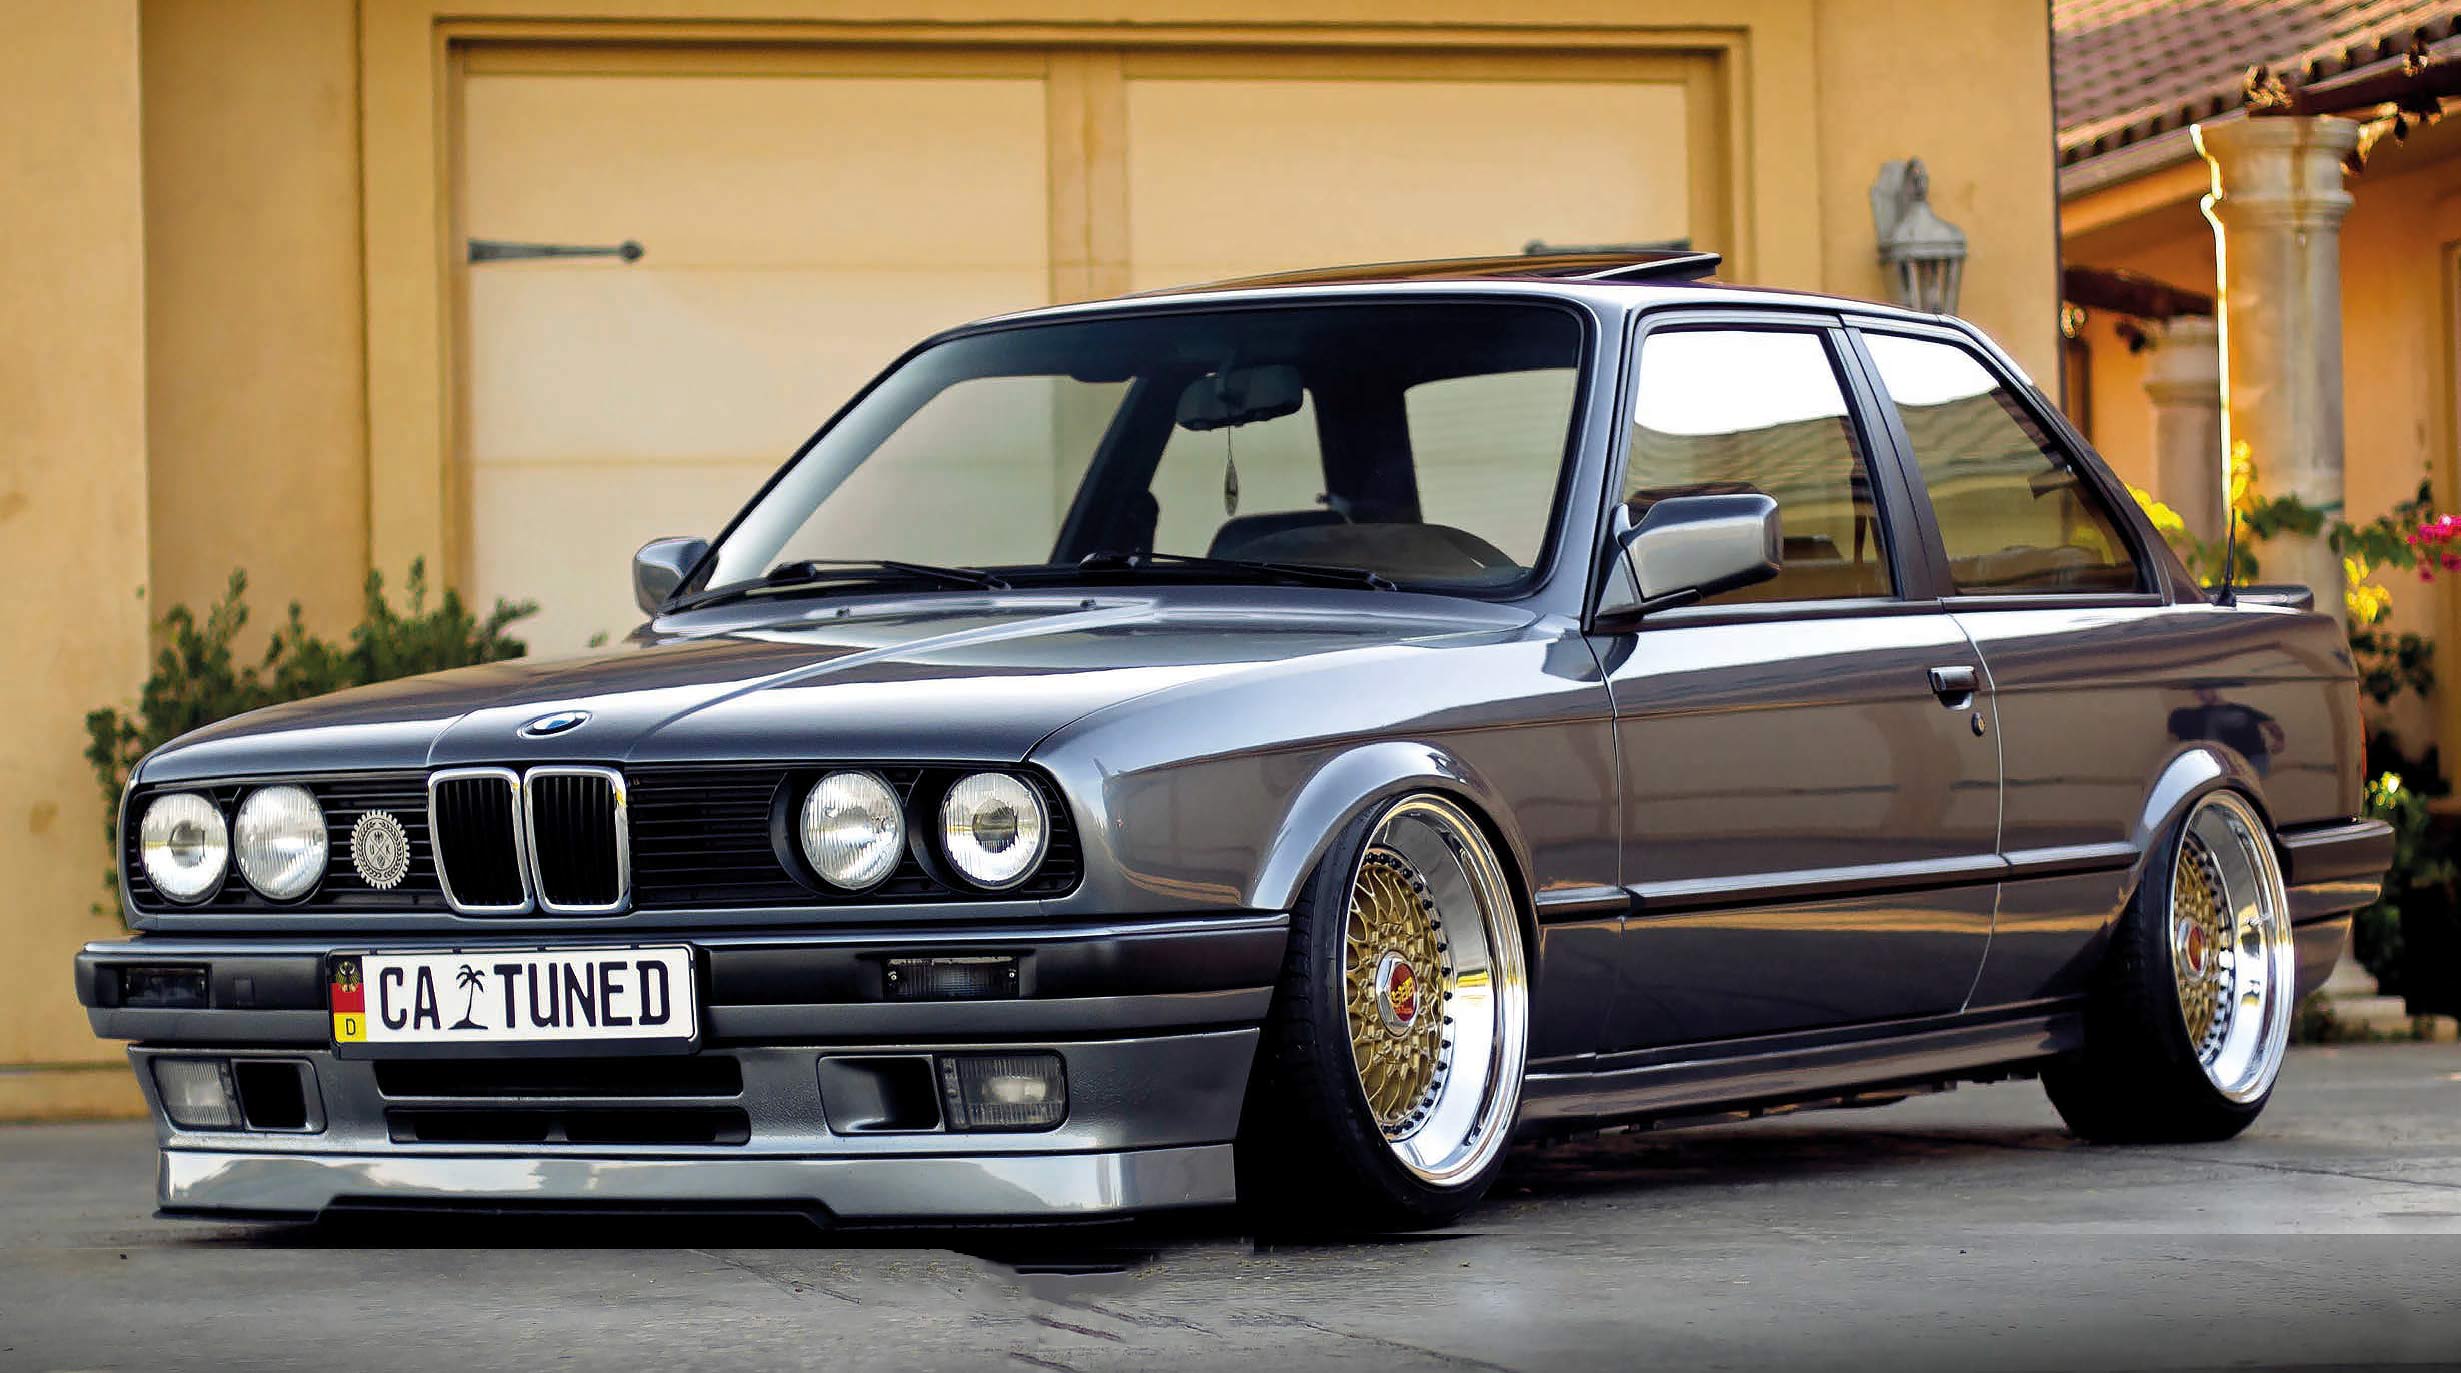 Sonny & Share Father and son built BMW 325iS E30 - Drive-My Blogs - Drive